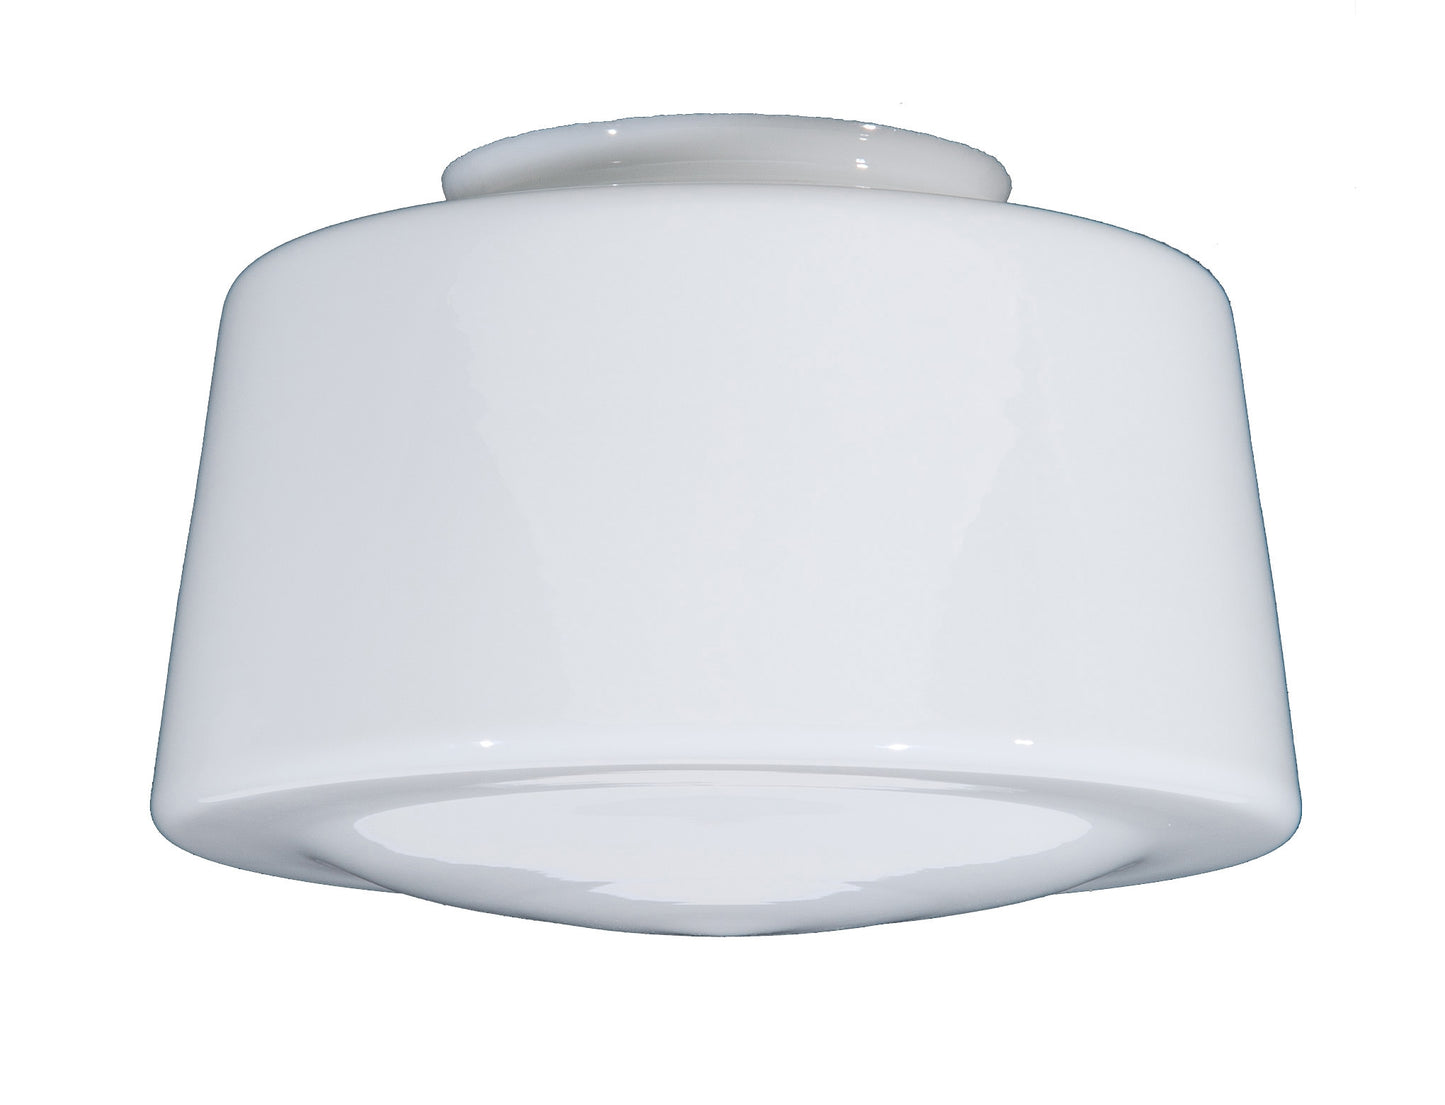 12" Opal Glass Schoolhouse Shade, 6 inch lip fitter